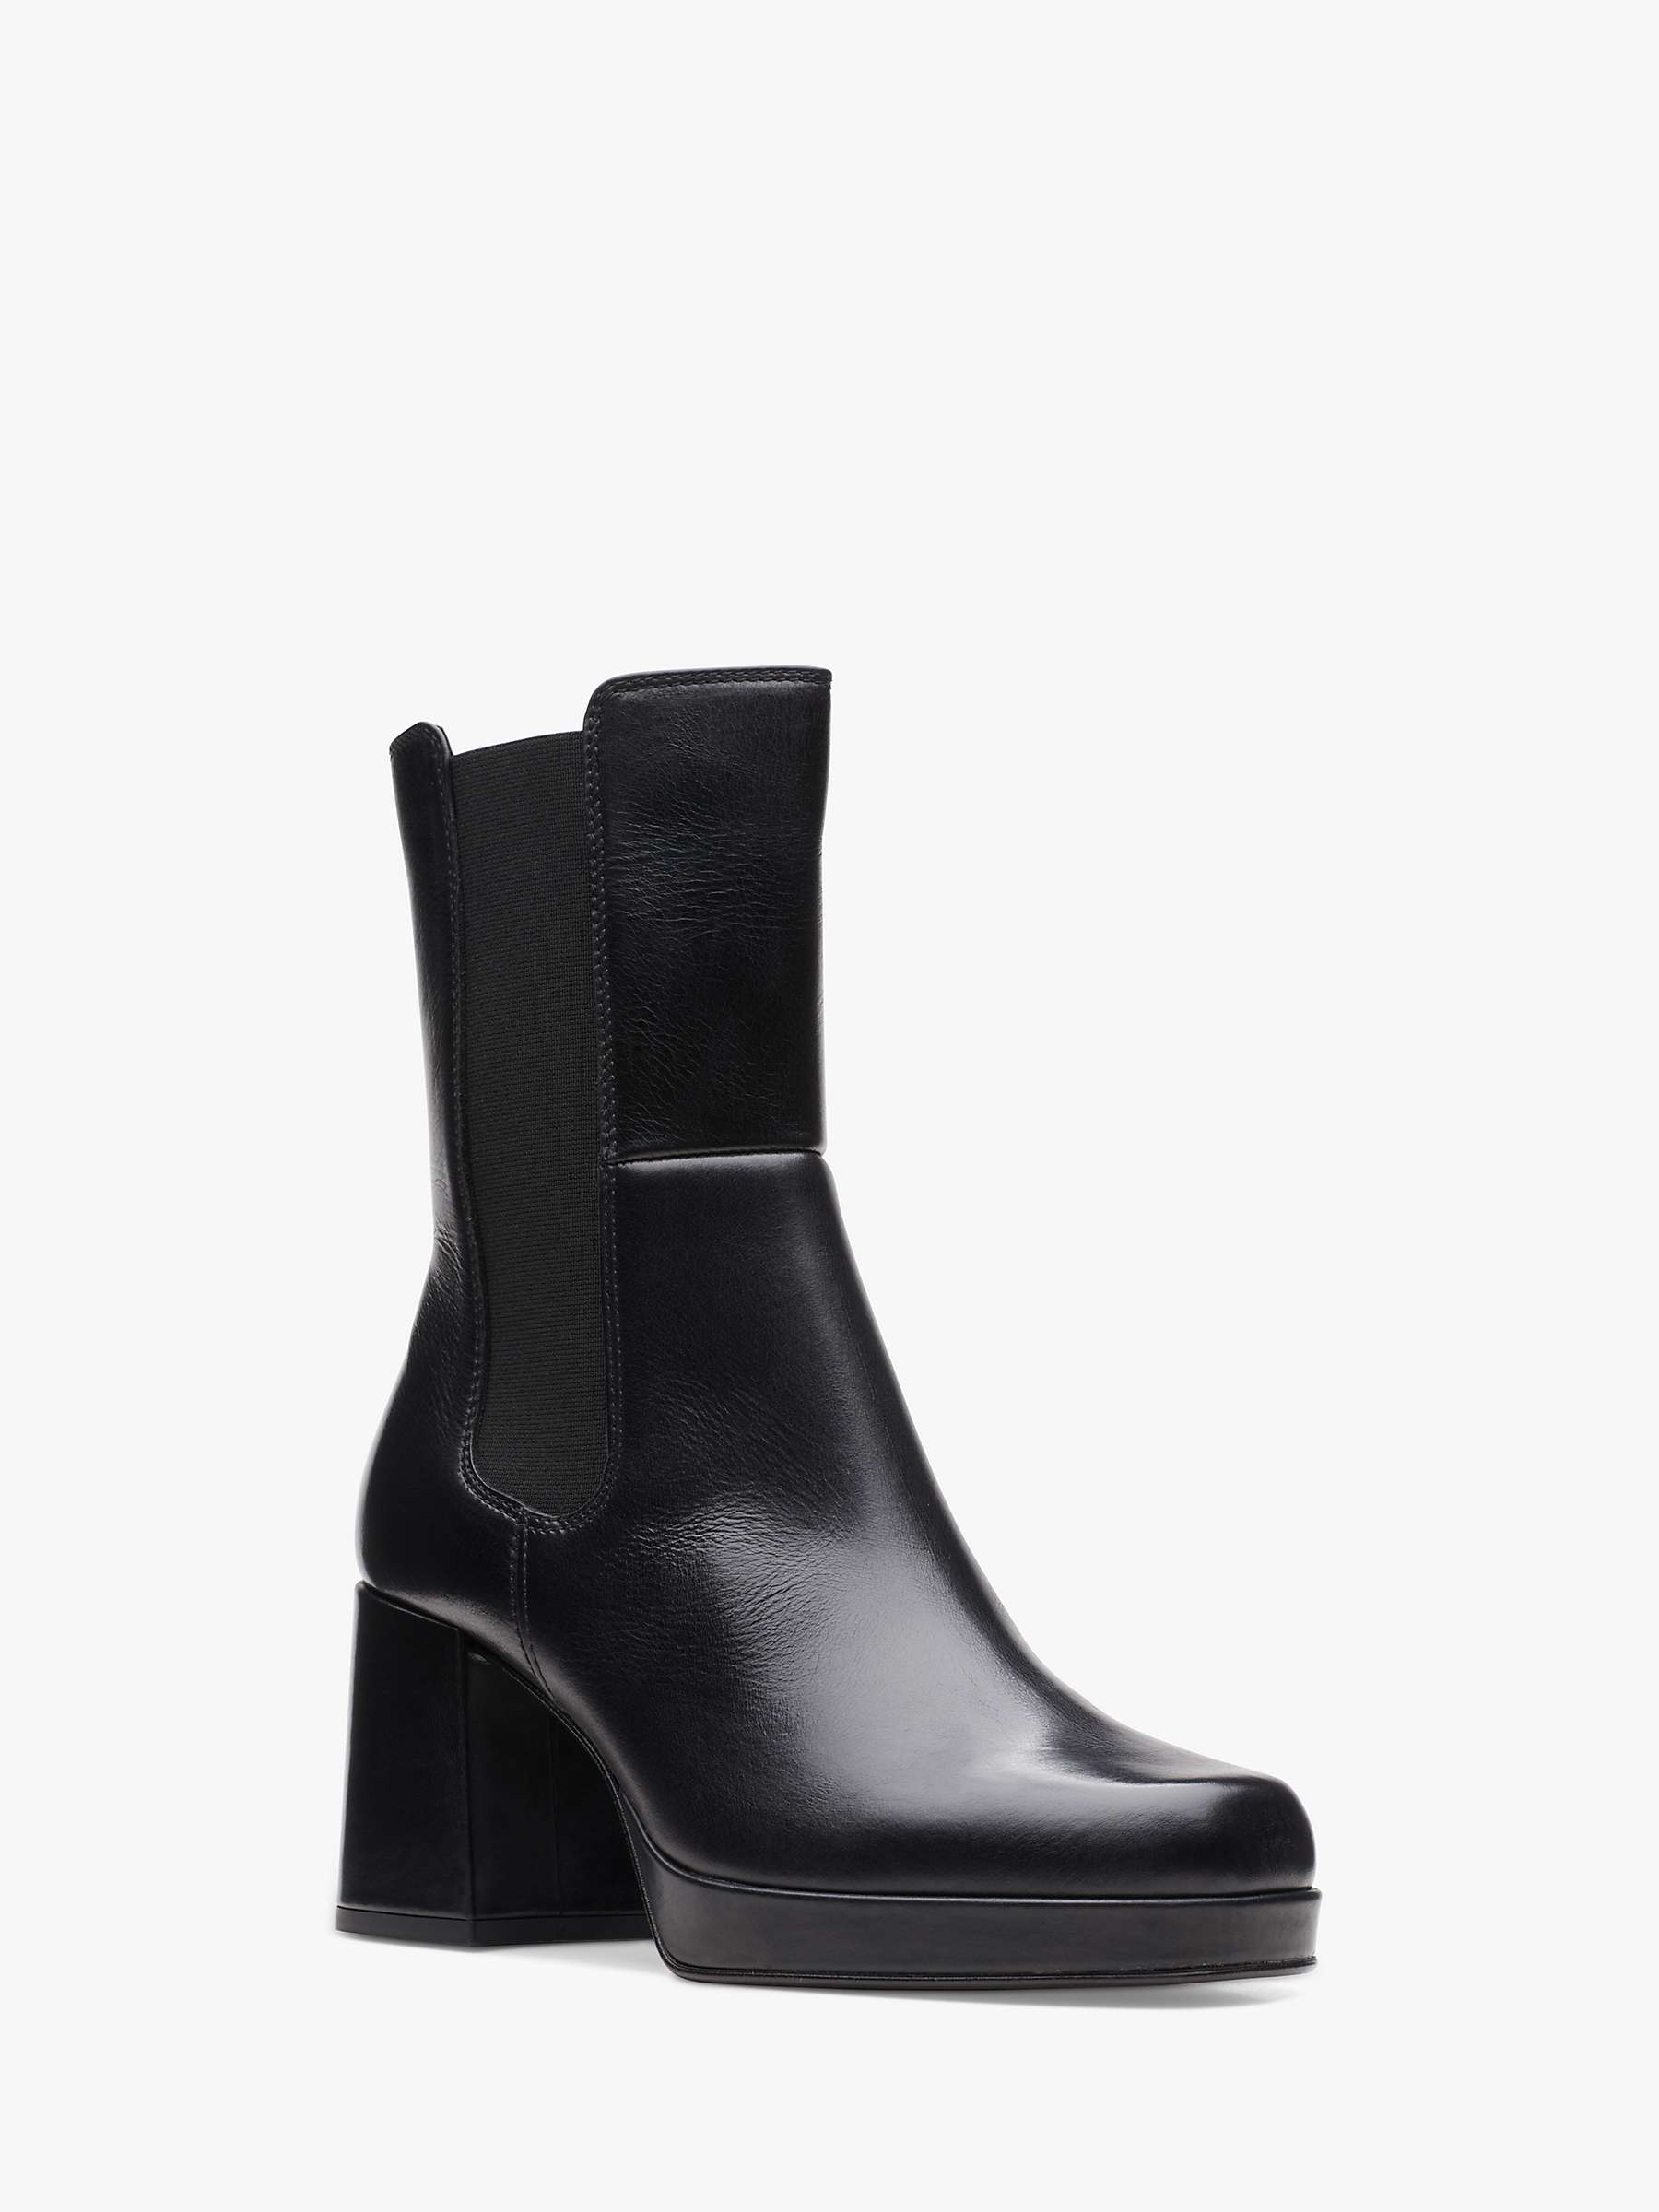 Clarks Pique Up Leather Chelsea Boots, Black at John Lewis & Partners